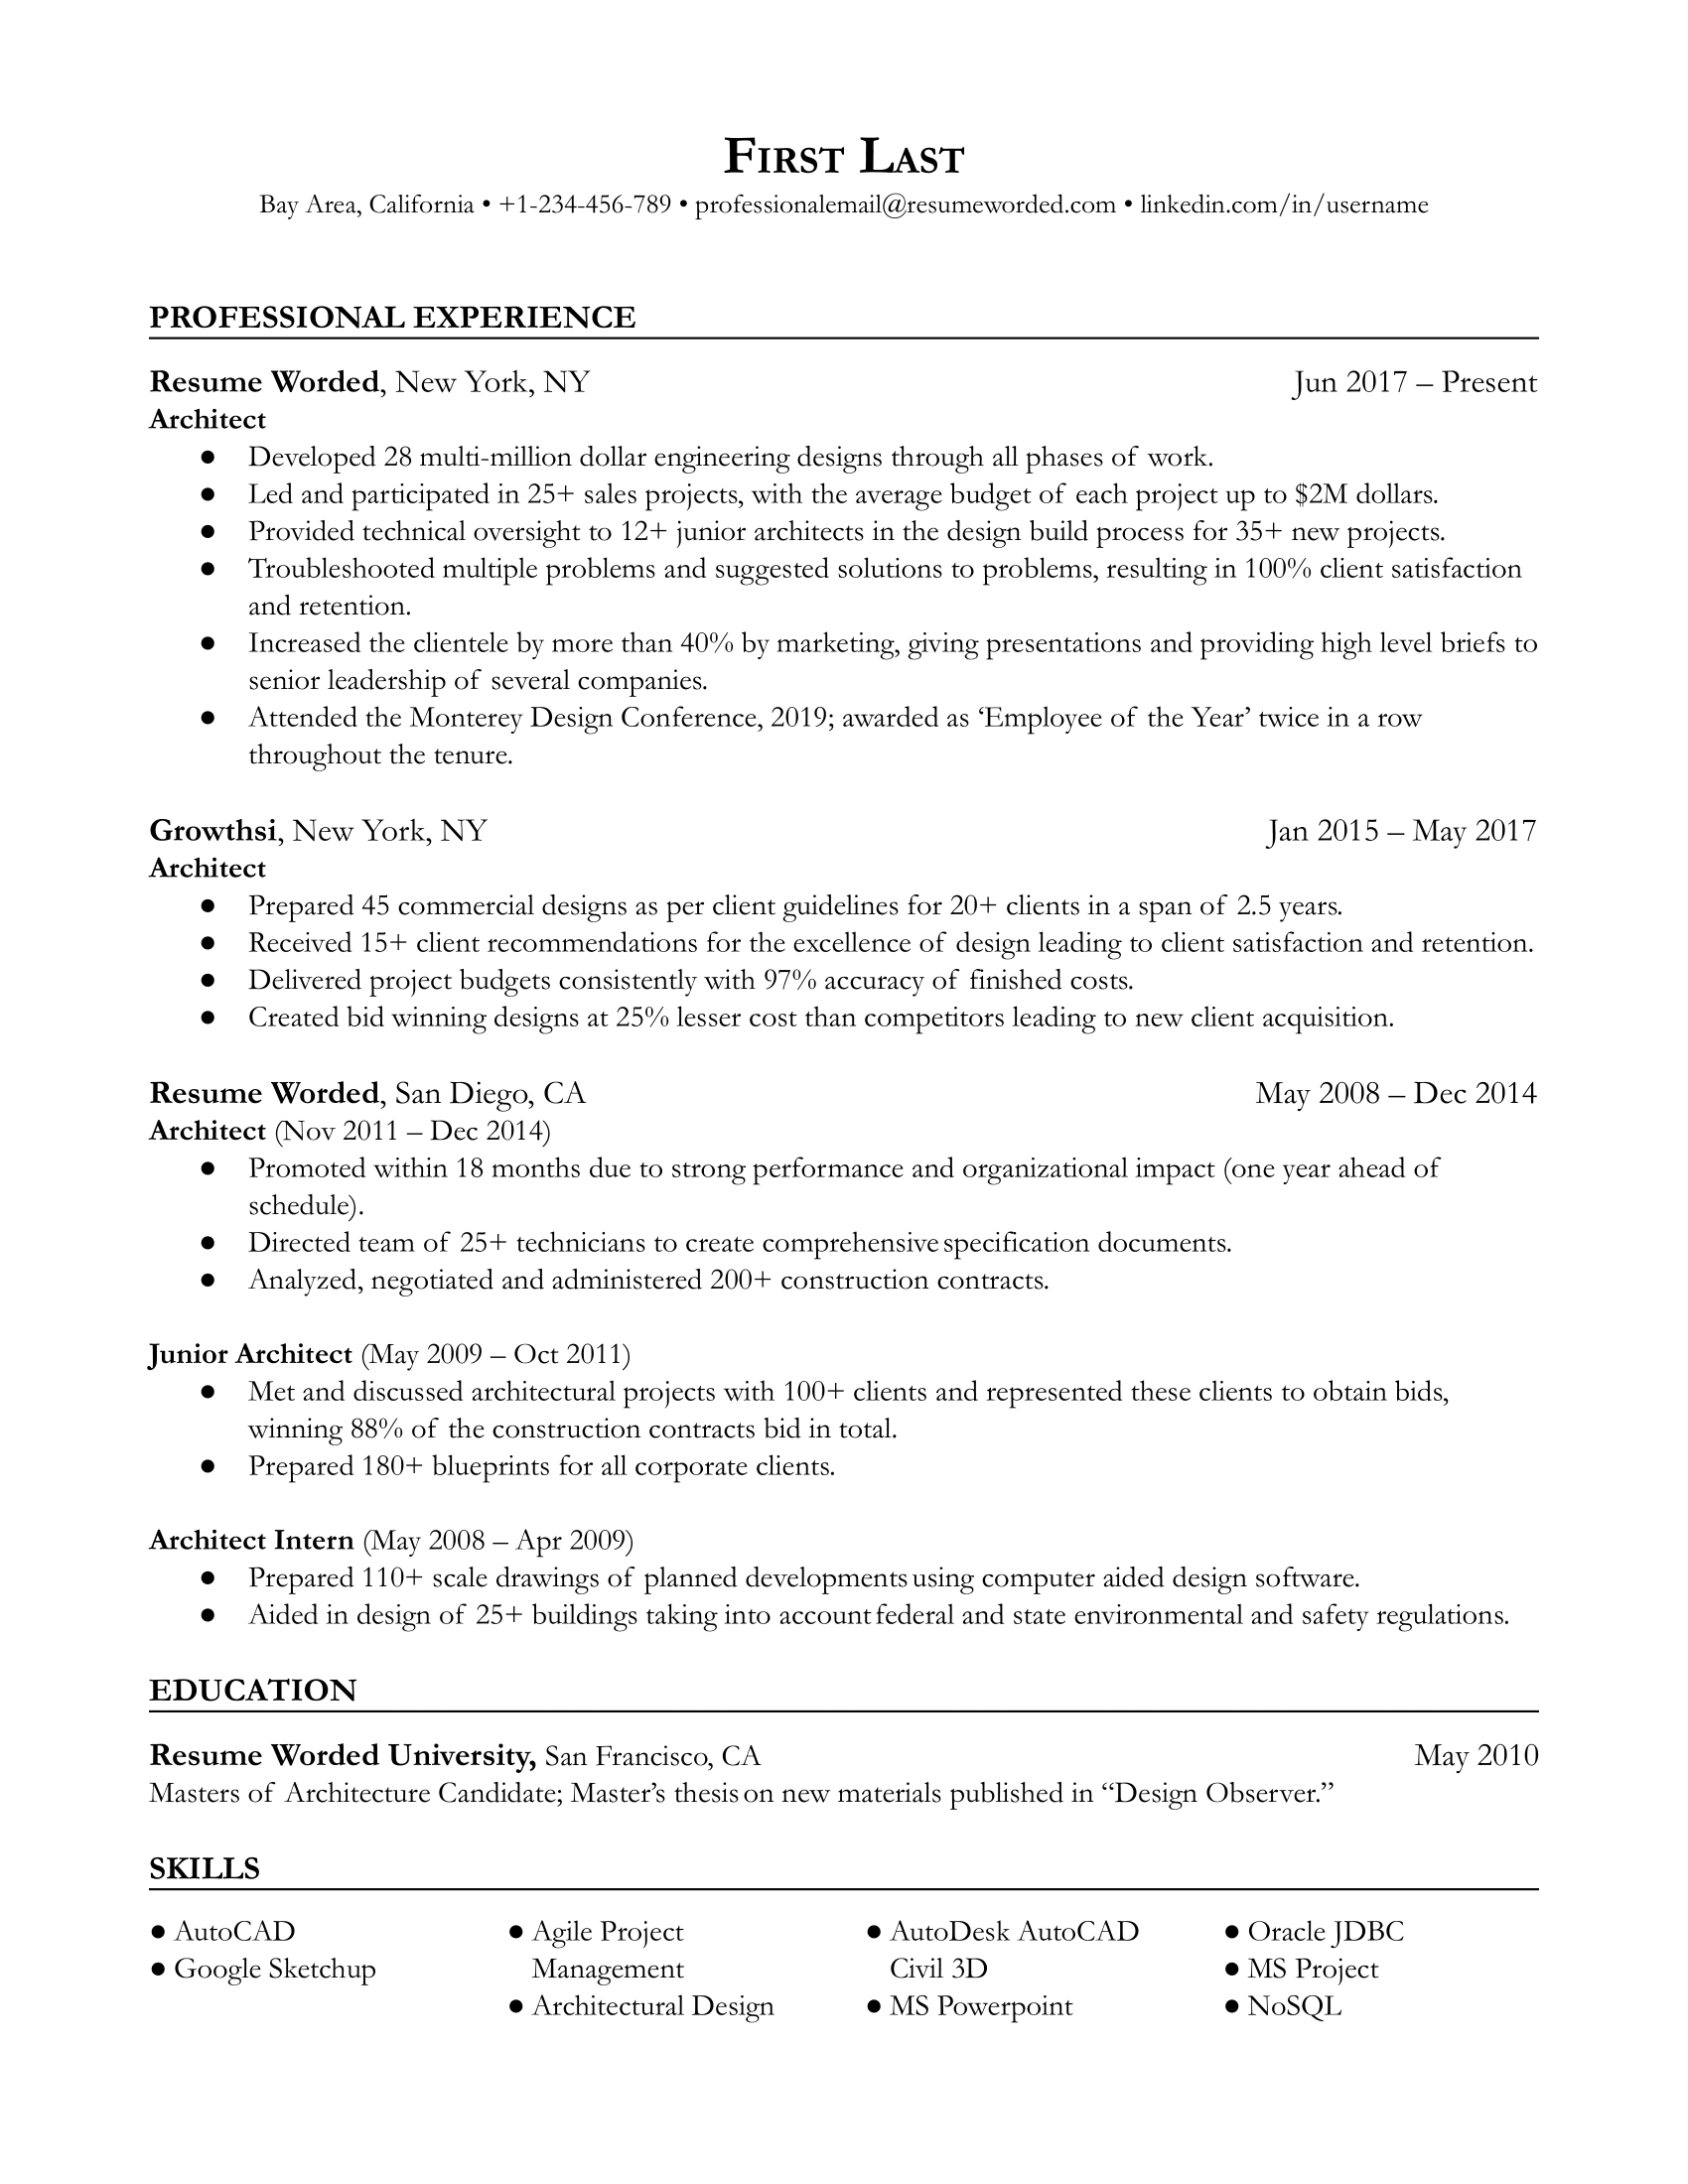 Architect resume showcasing software proficiency and sustainable design experience.